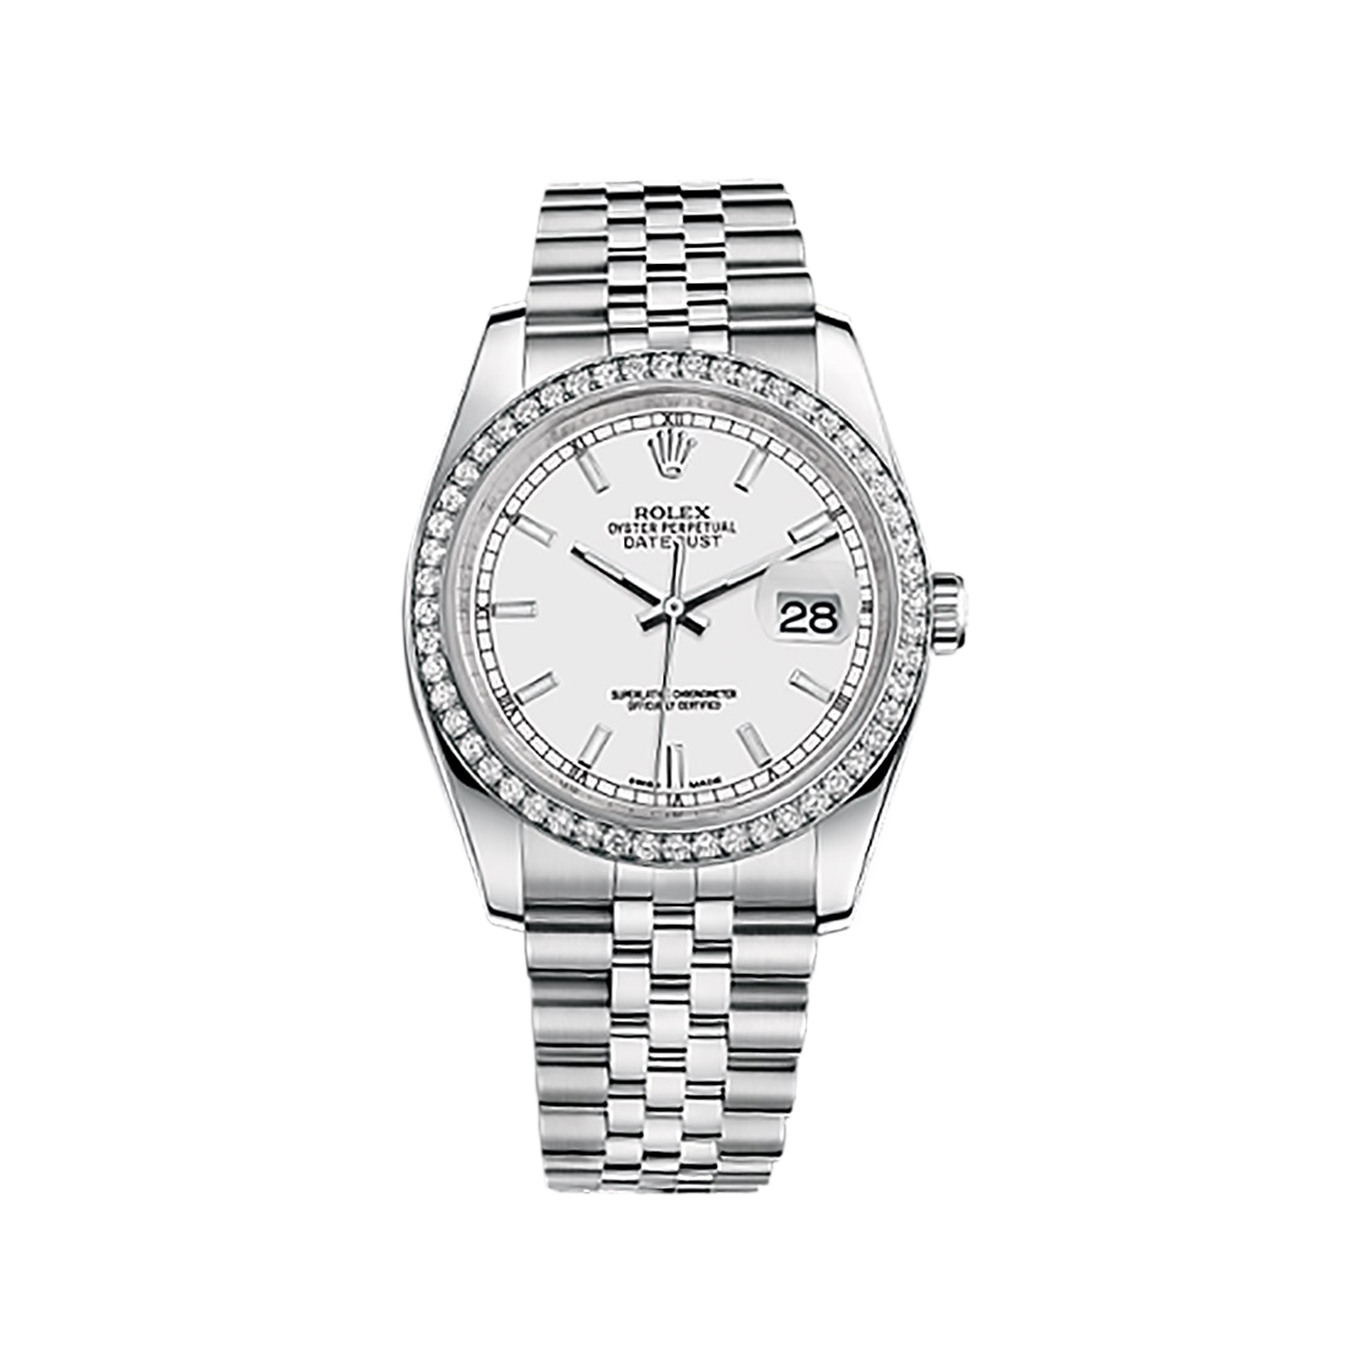 Datejust 36 116244 White Gold & Stainless Steel Watch (White)